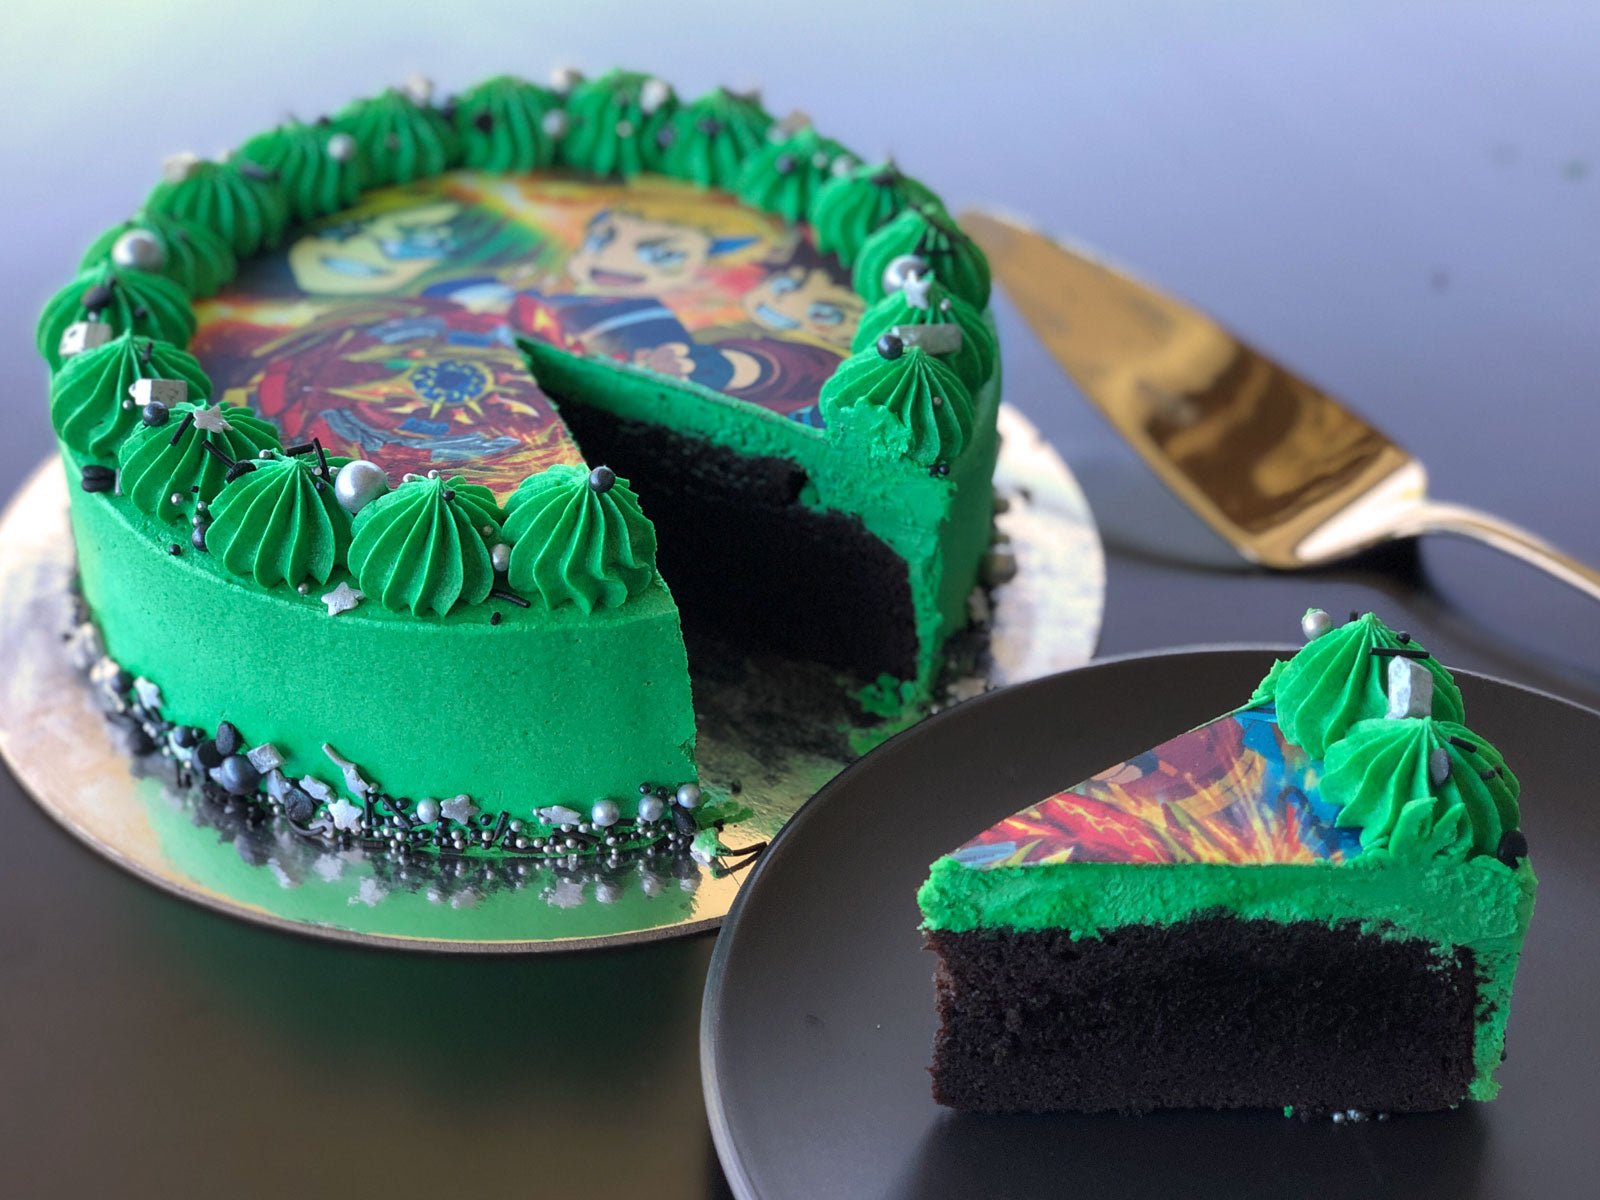 Amelia's Kitchen - PJ Masks Cake - inside the bottom tier is double  chocolate, top tier is white chocolate mud cake with homemade caramel sauce  & caramel ganache. Decorated as always with